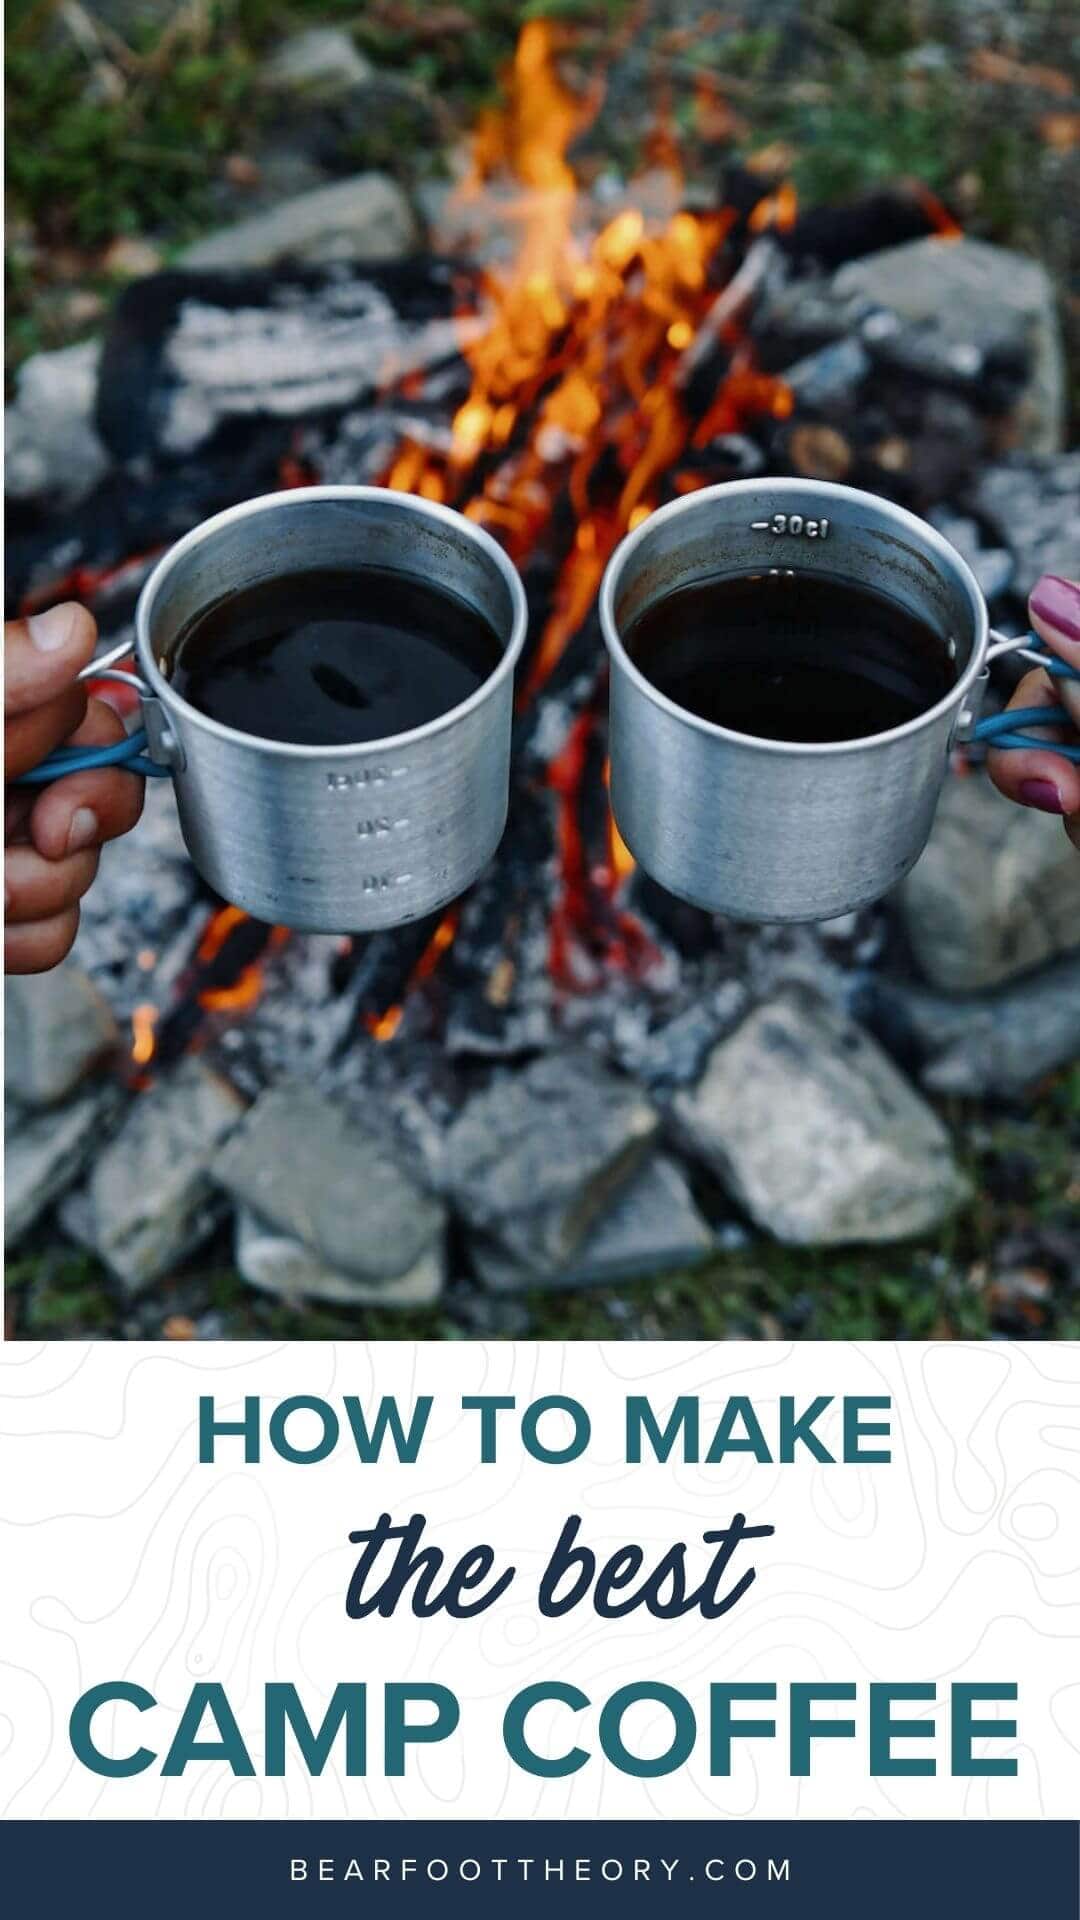 6 ways to make the best camp coffee with easy, lightweight options for backpacking, plus the tools you need for a strong and tasty cup.